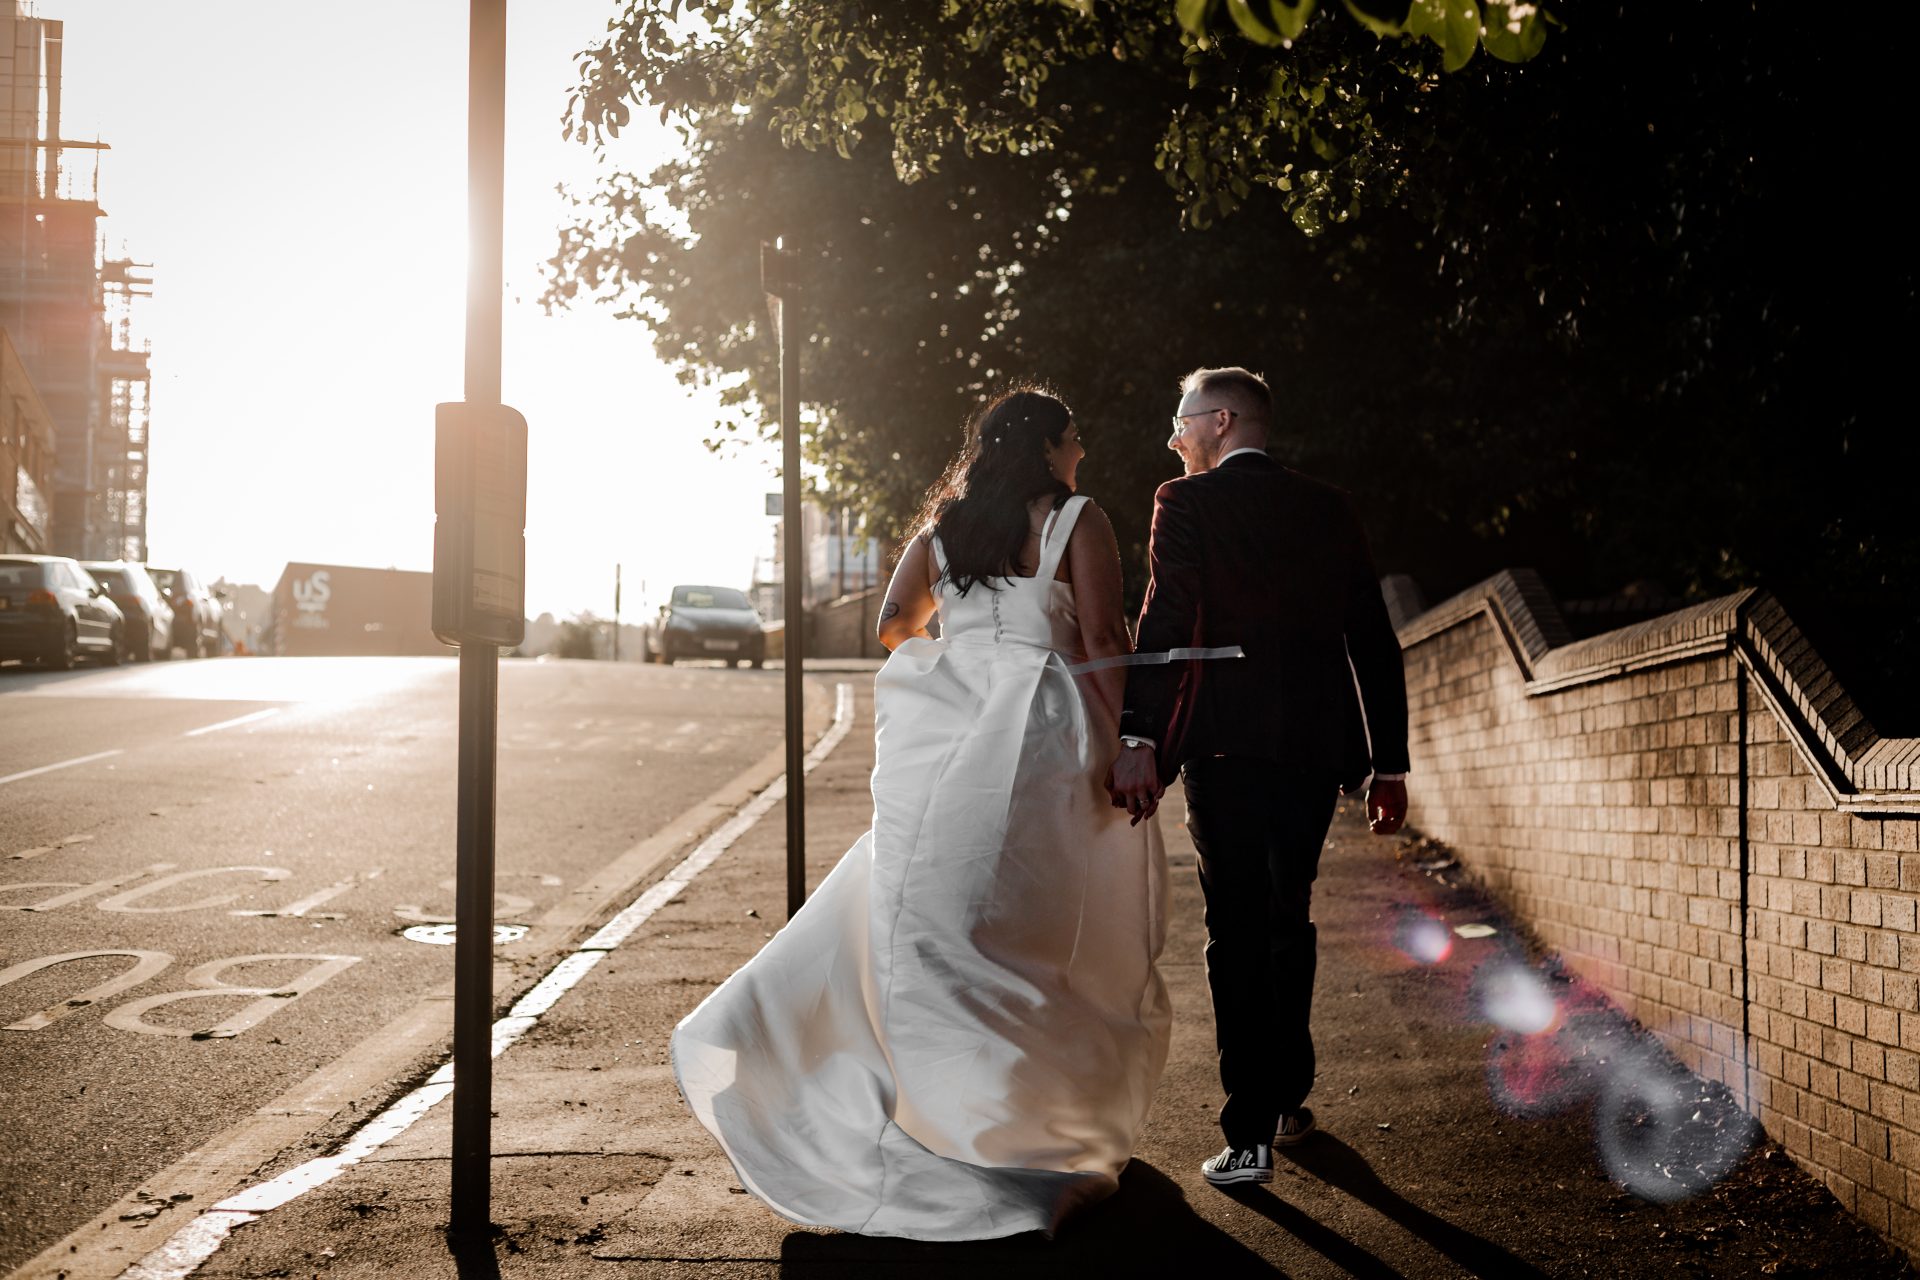 Isabelle Biggs Photography - Alternative Bride & Groom walking away in the sunset